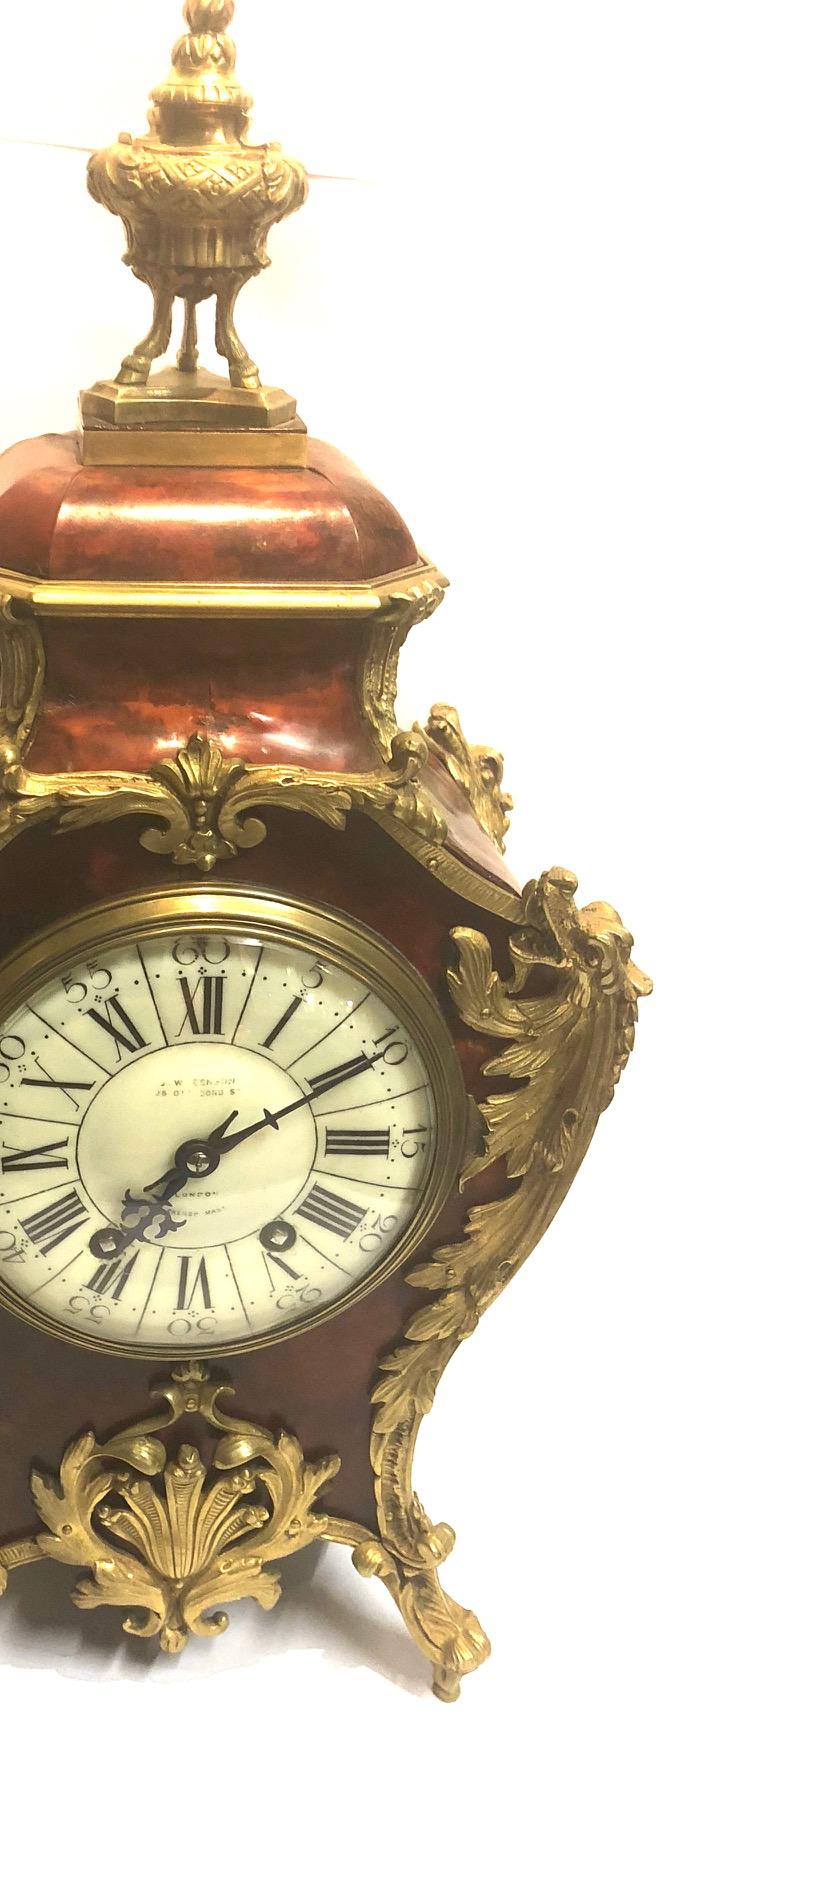 The French red tortoiseshell case with urn finial, foliated bronze mounts with dragon heads to the shoulder and lower leaf molded crest, the English dial stamped 'J.W. Benson 25 Old Bond Street London'.

Established in 1874, J.W. Benson clock and